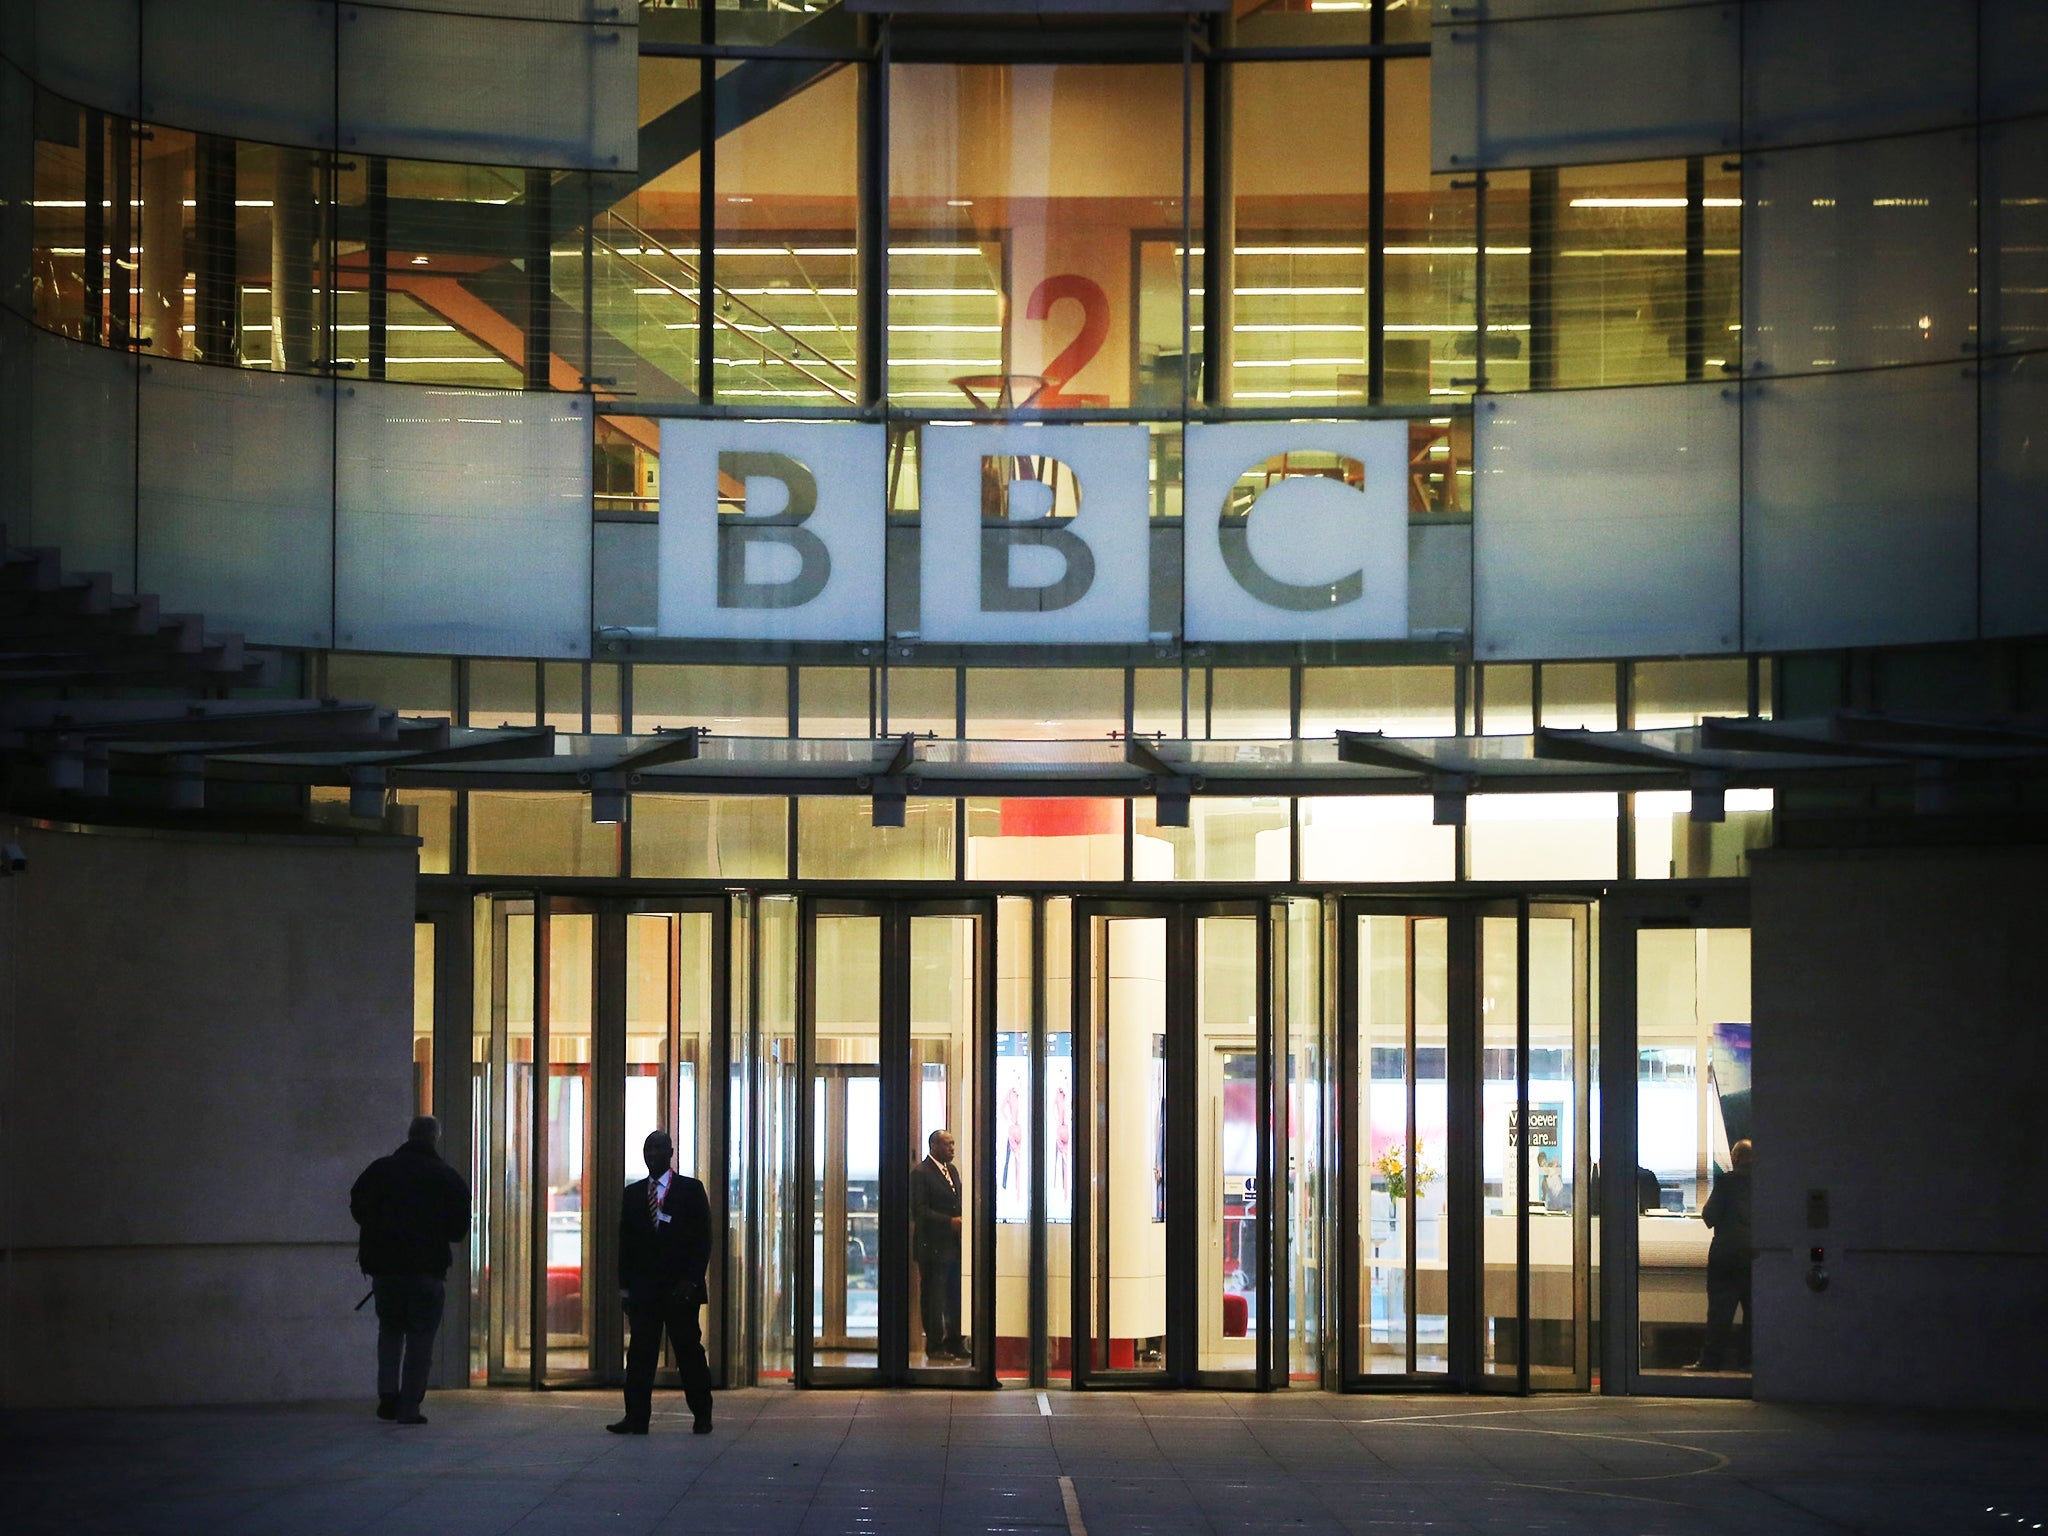 What the BBC needs is a thoughtful, helpful conversation about its future